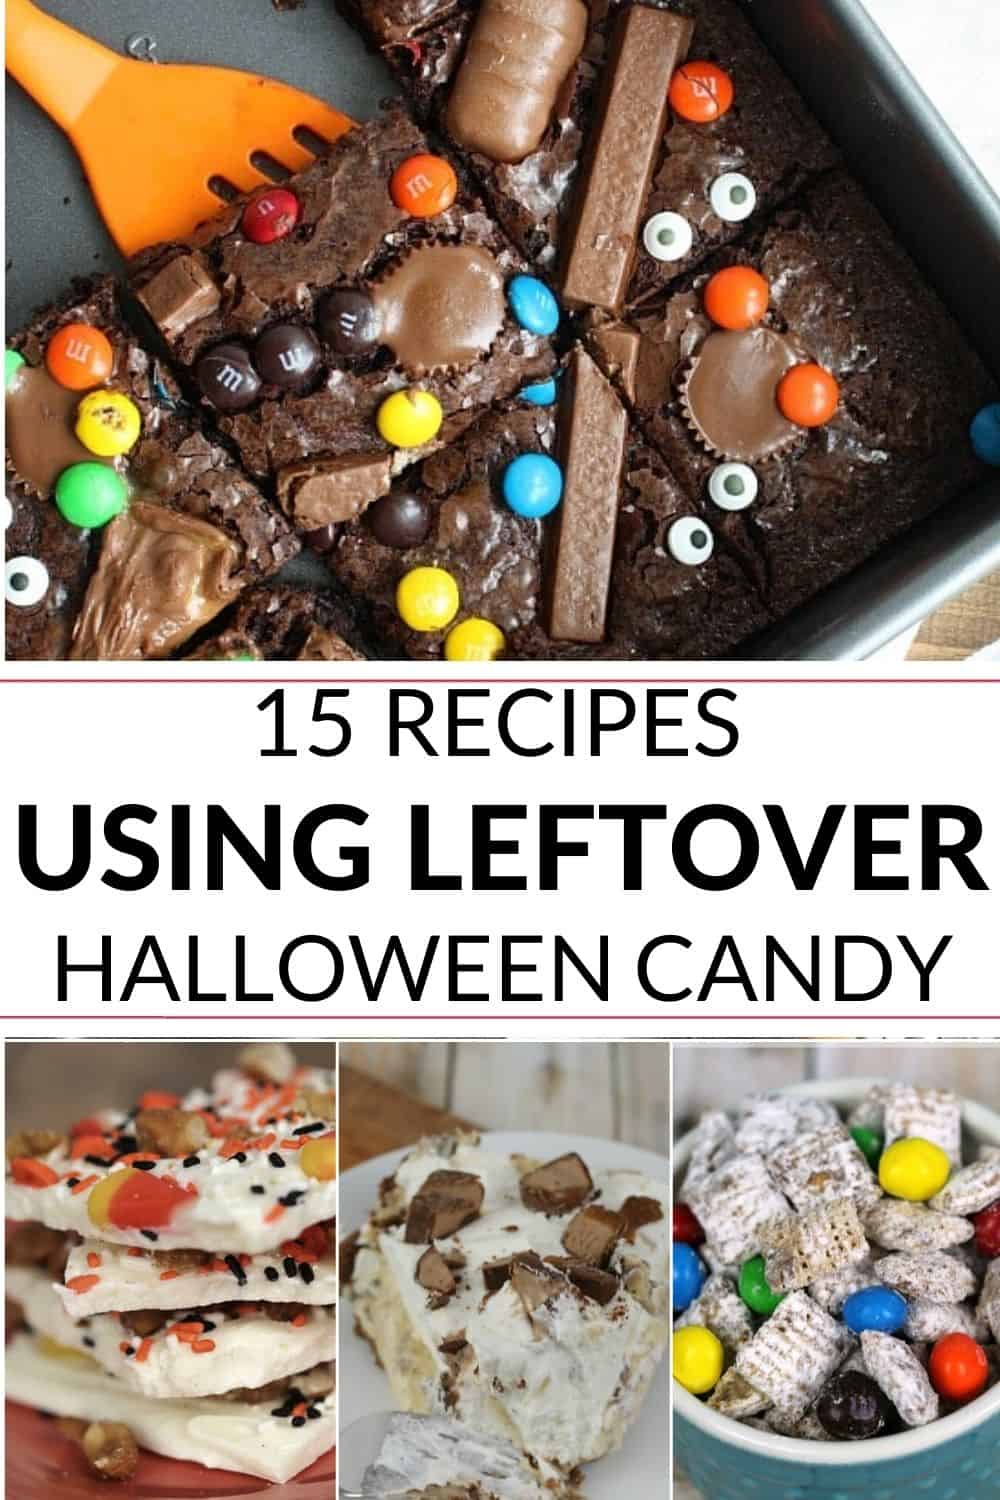 Collage of 4 images of recipes using leftover Halloween candy listed in the post